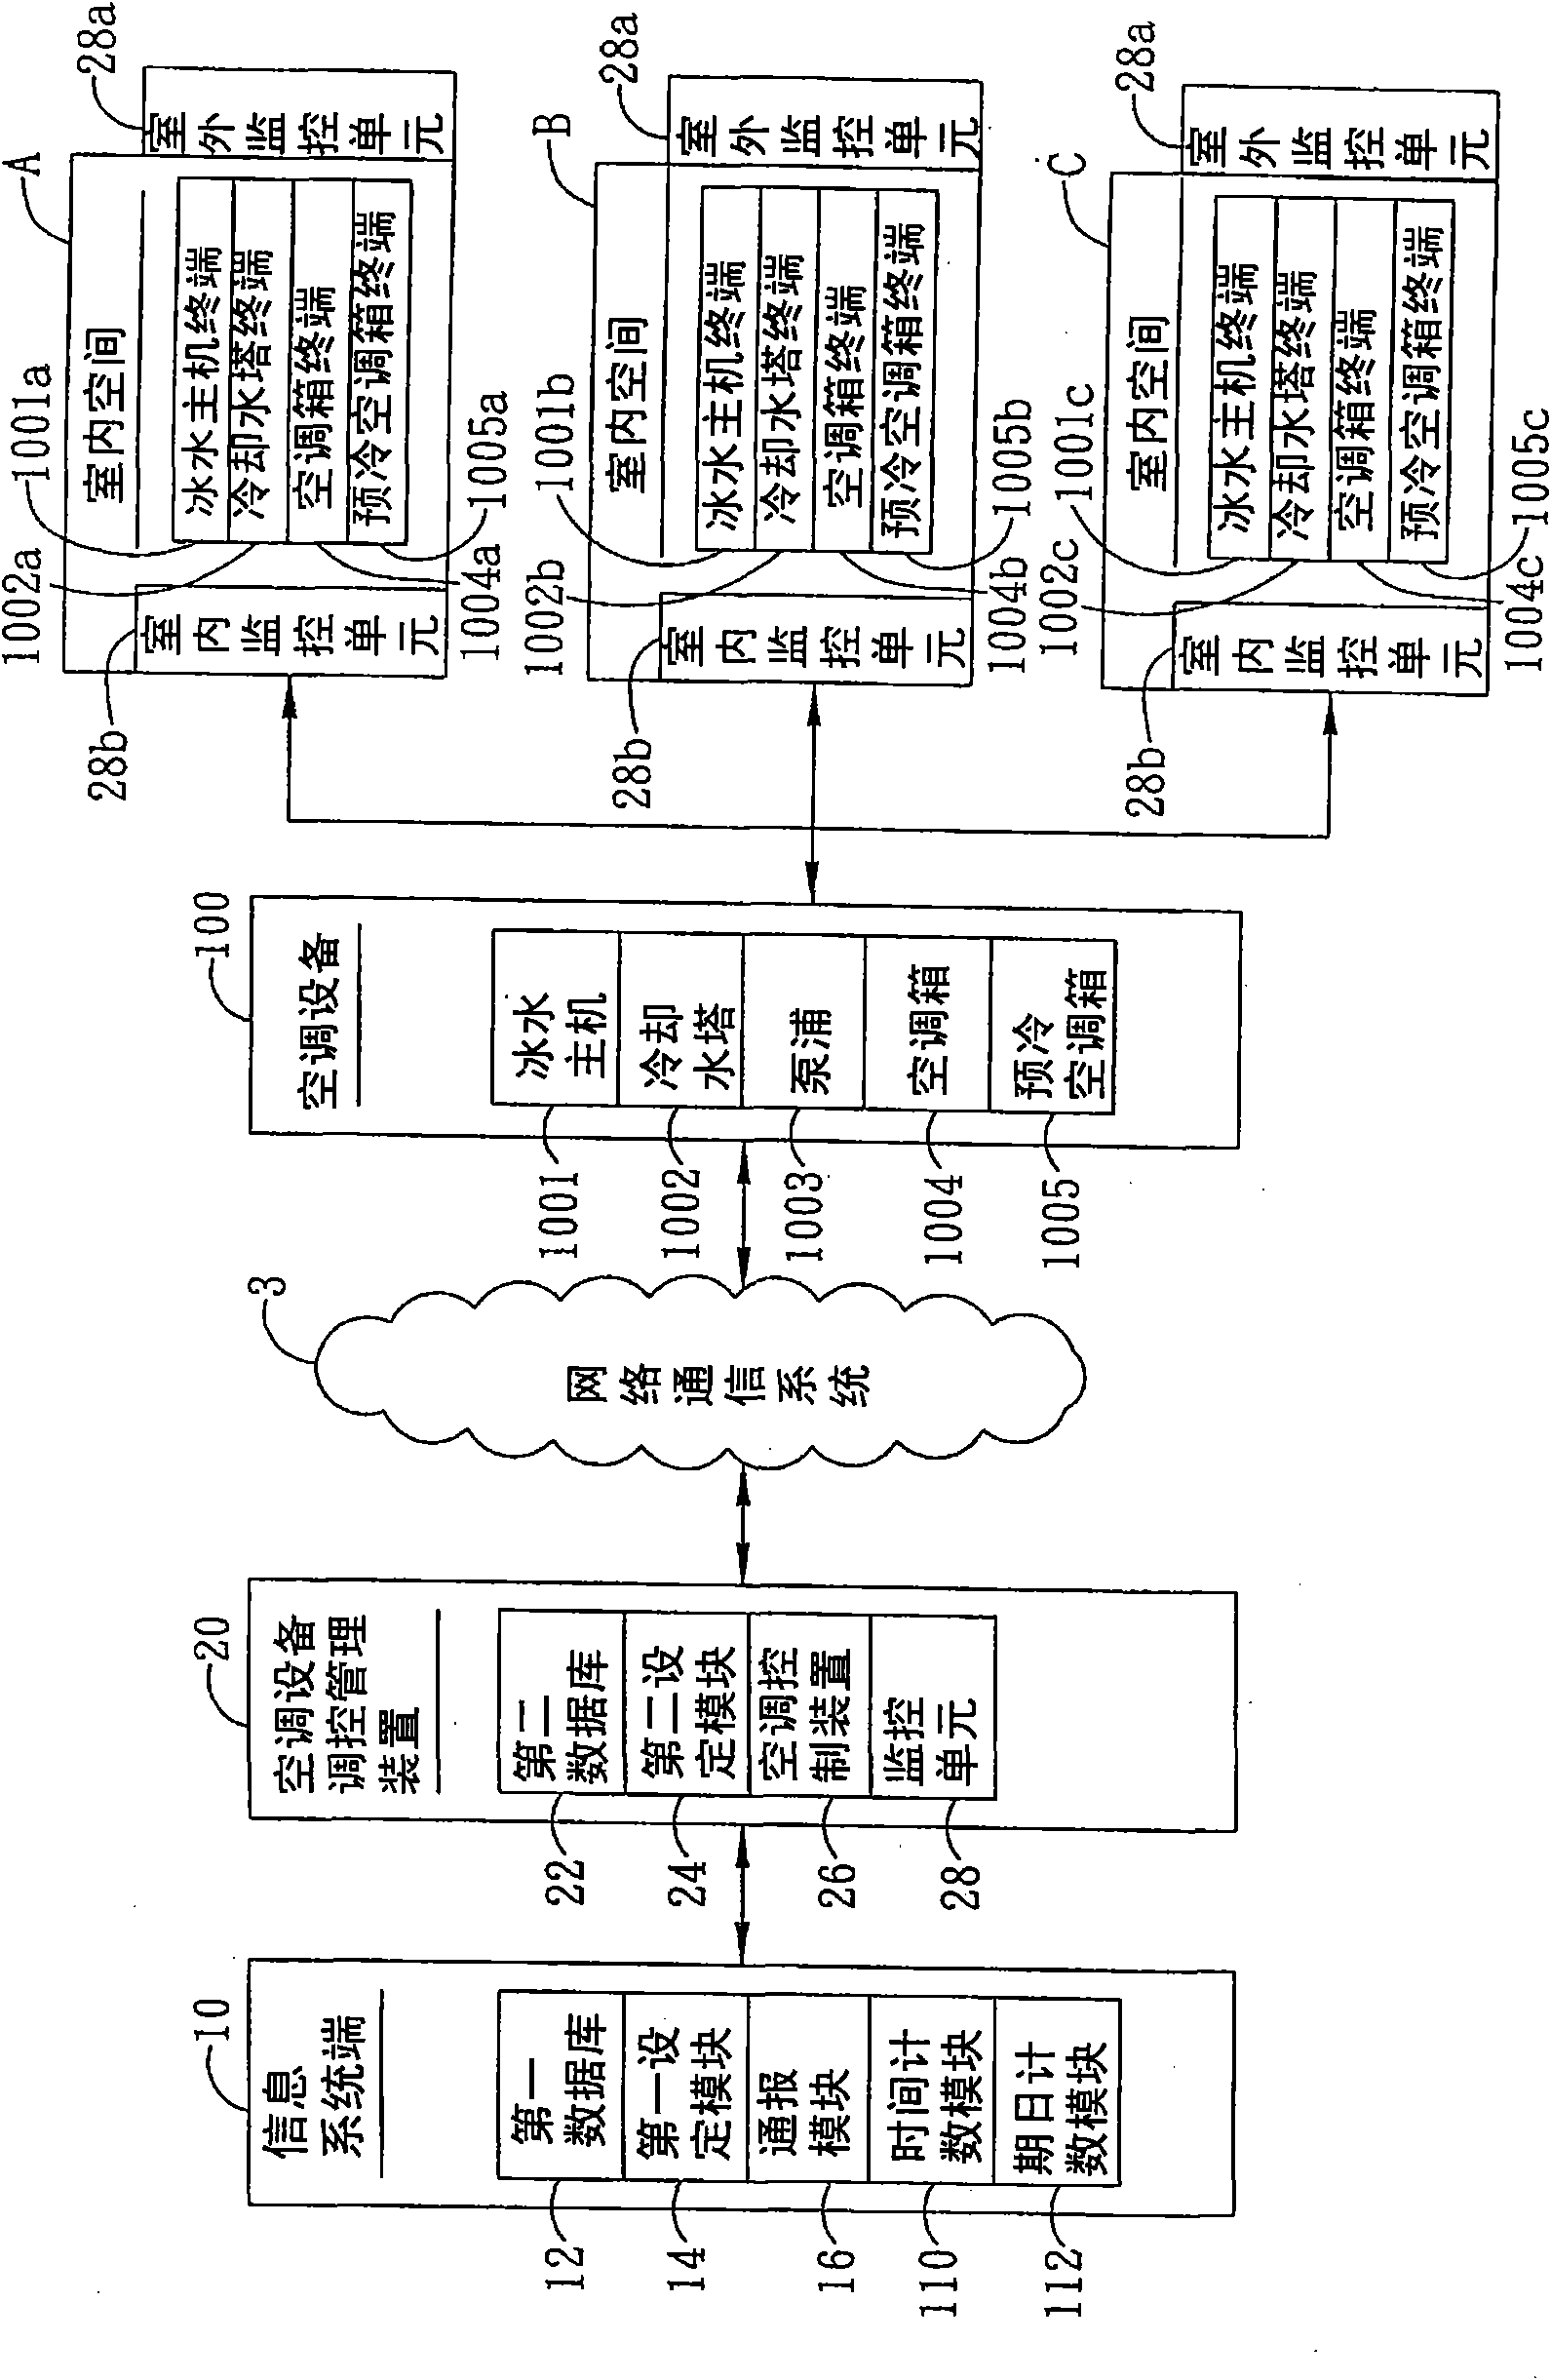 Air conditioning equipment regulation control management system for integrating information system